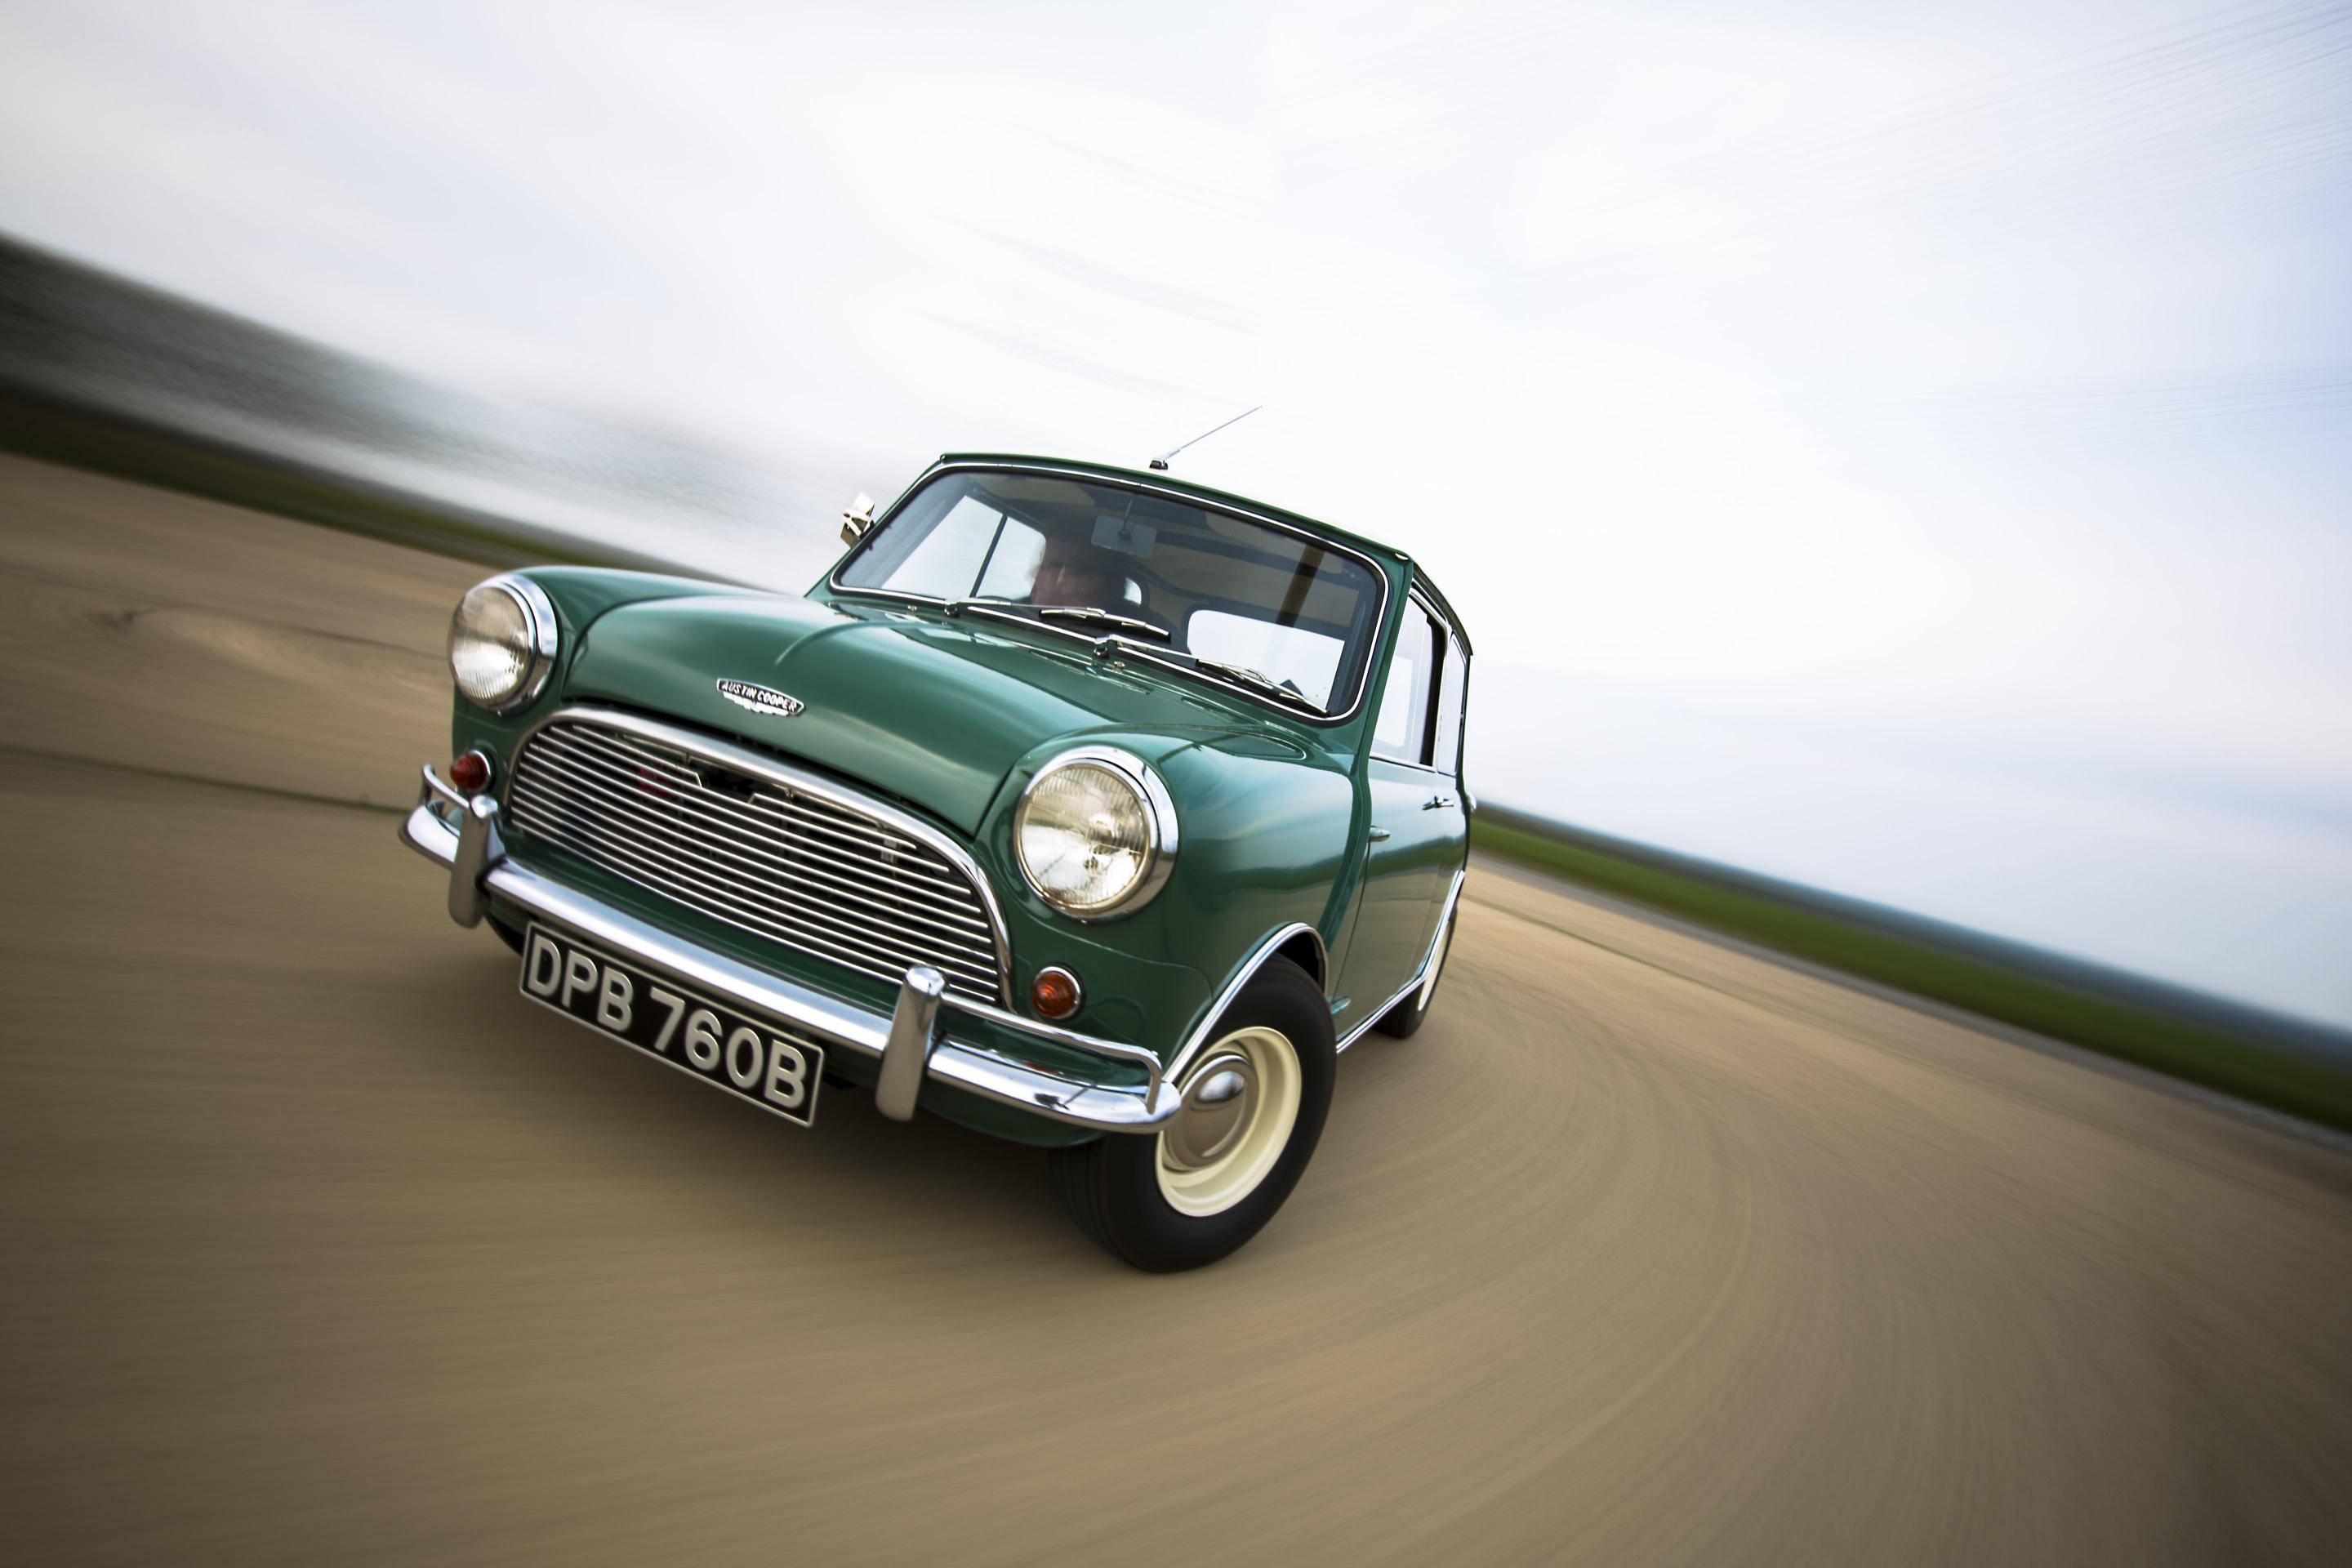 The Mini was the darling of the Swinging Sixties but when did its party finally come to an end?